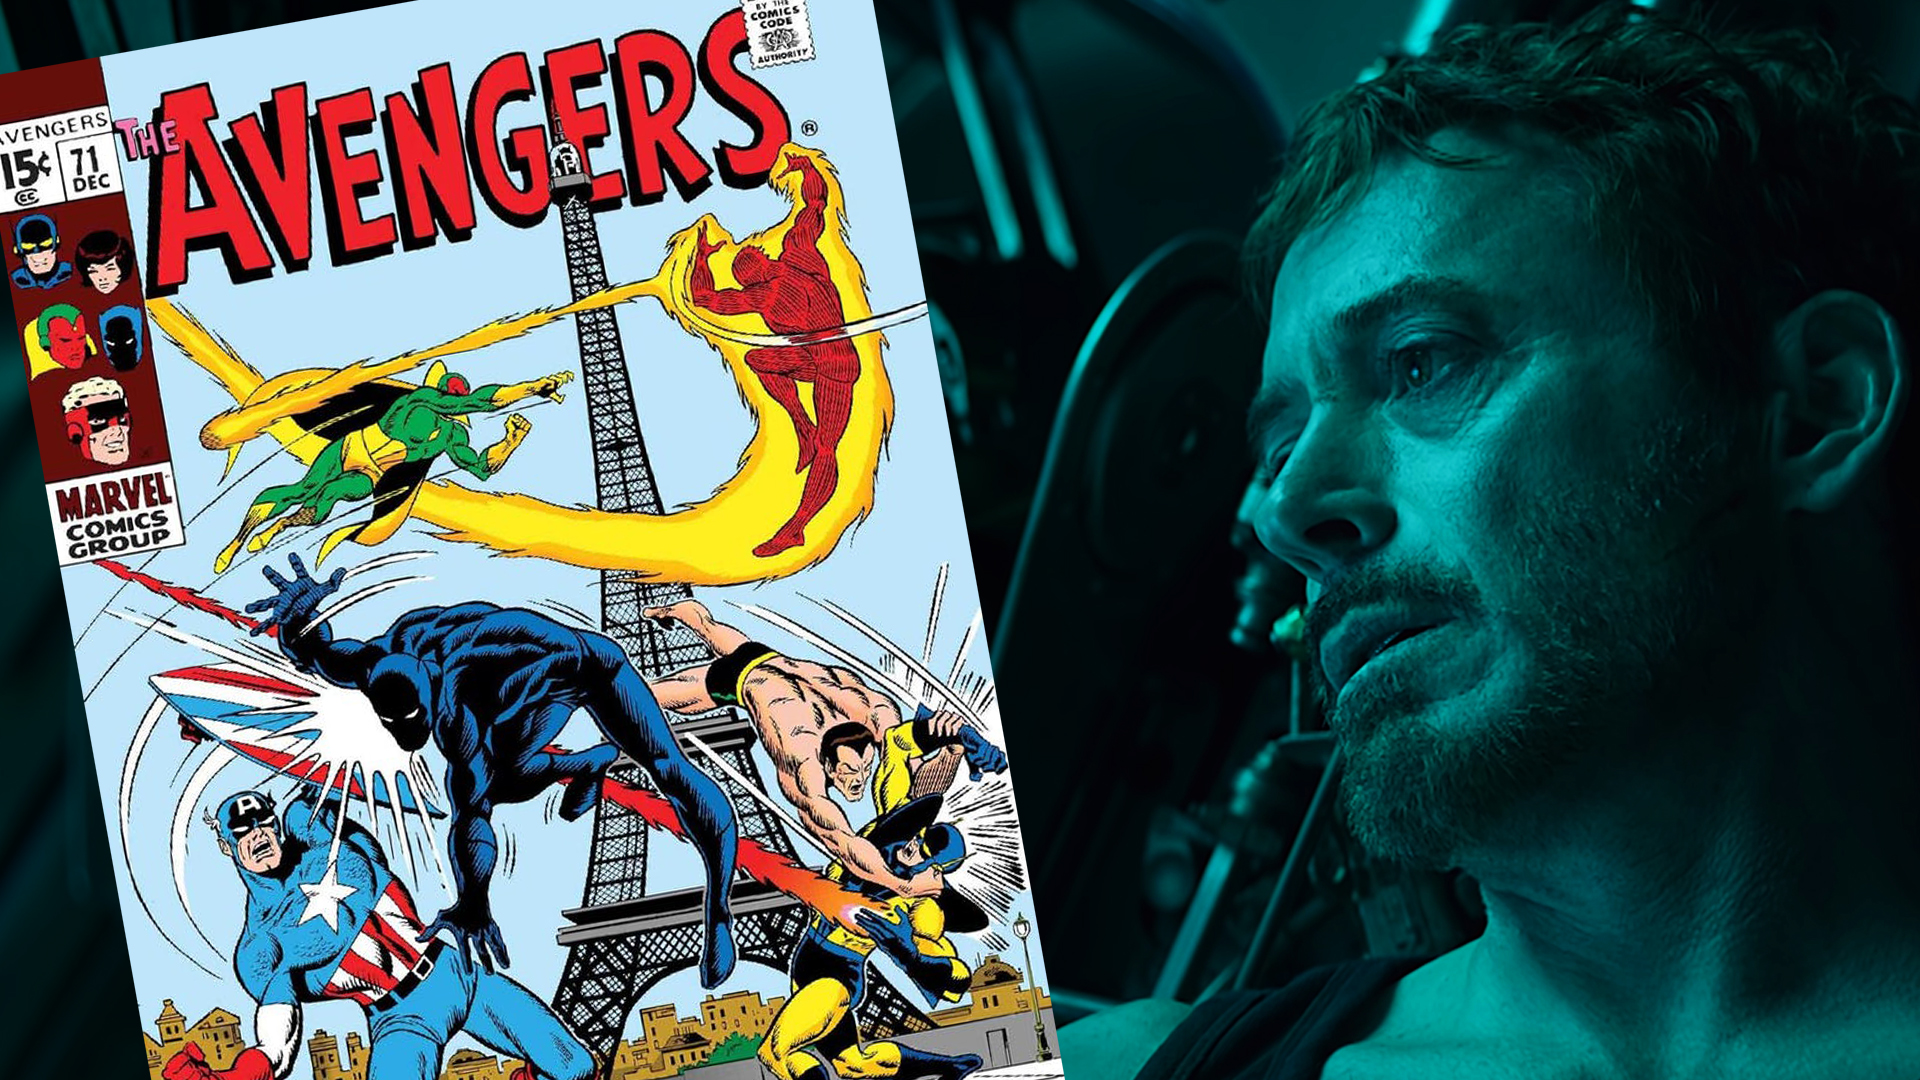 marvel accidentally leak the plot of avengers endgame after reprinting a 1969 issue of avengers titled endgame time travel fan theory